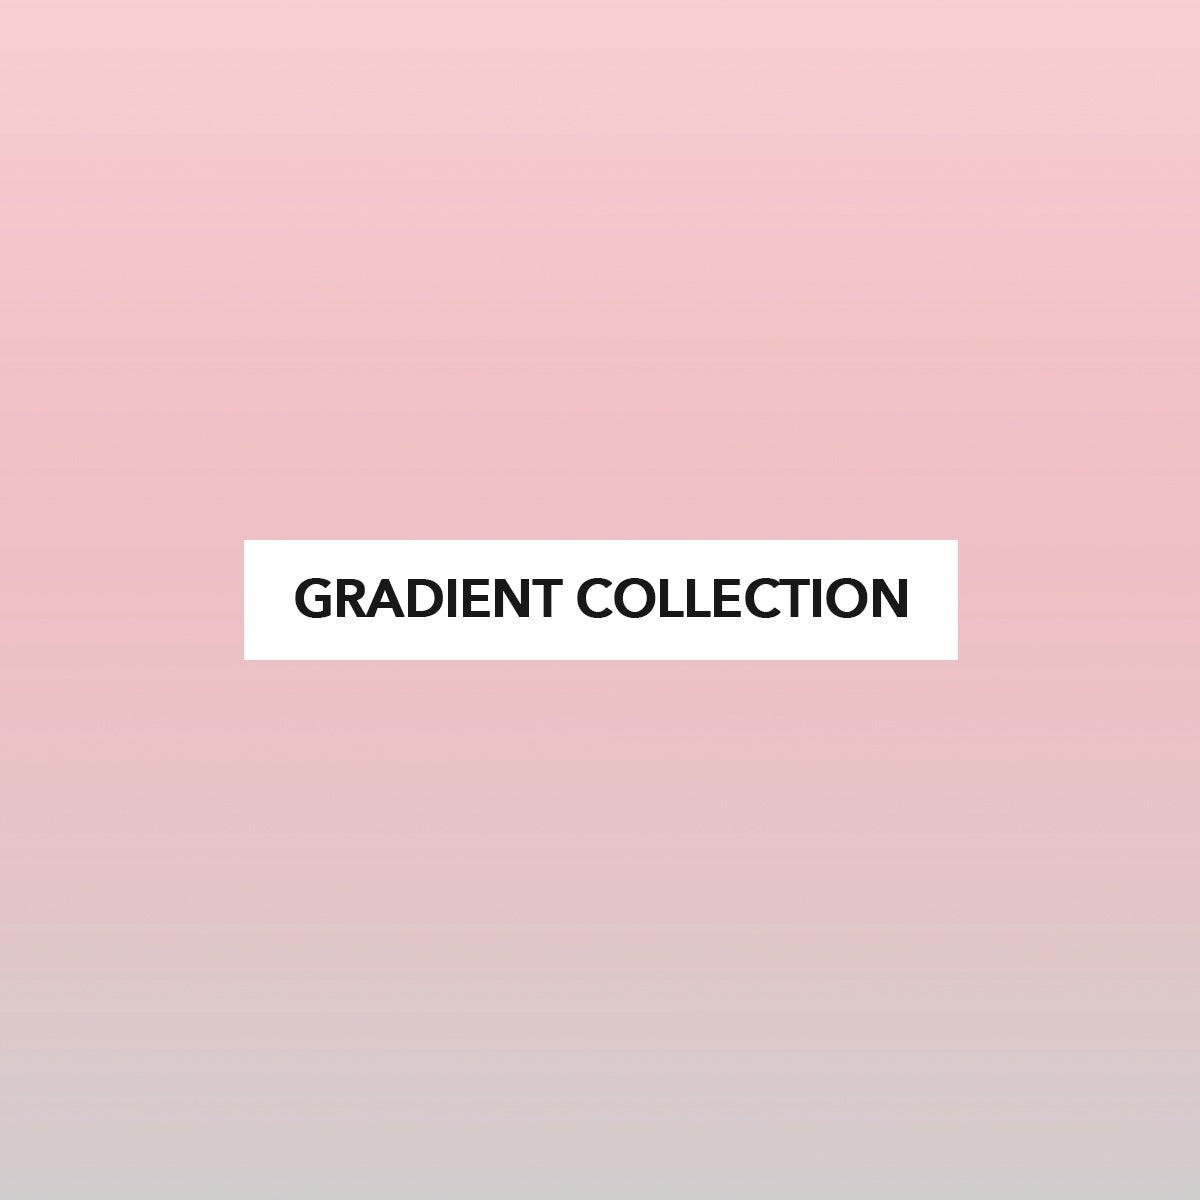 Gradient Collection